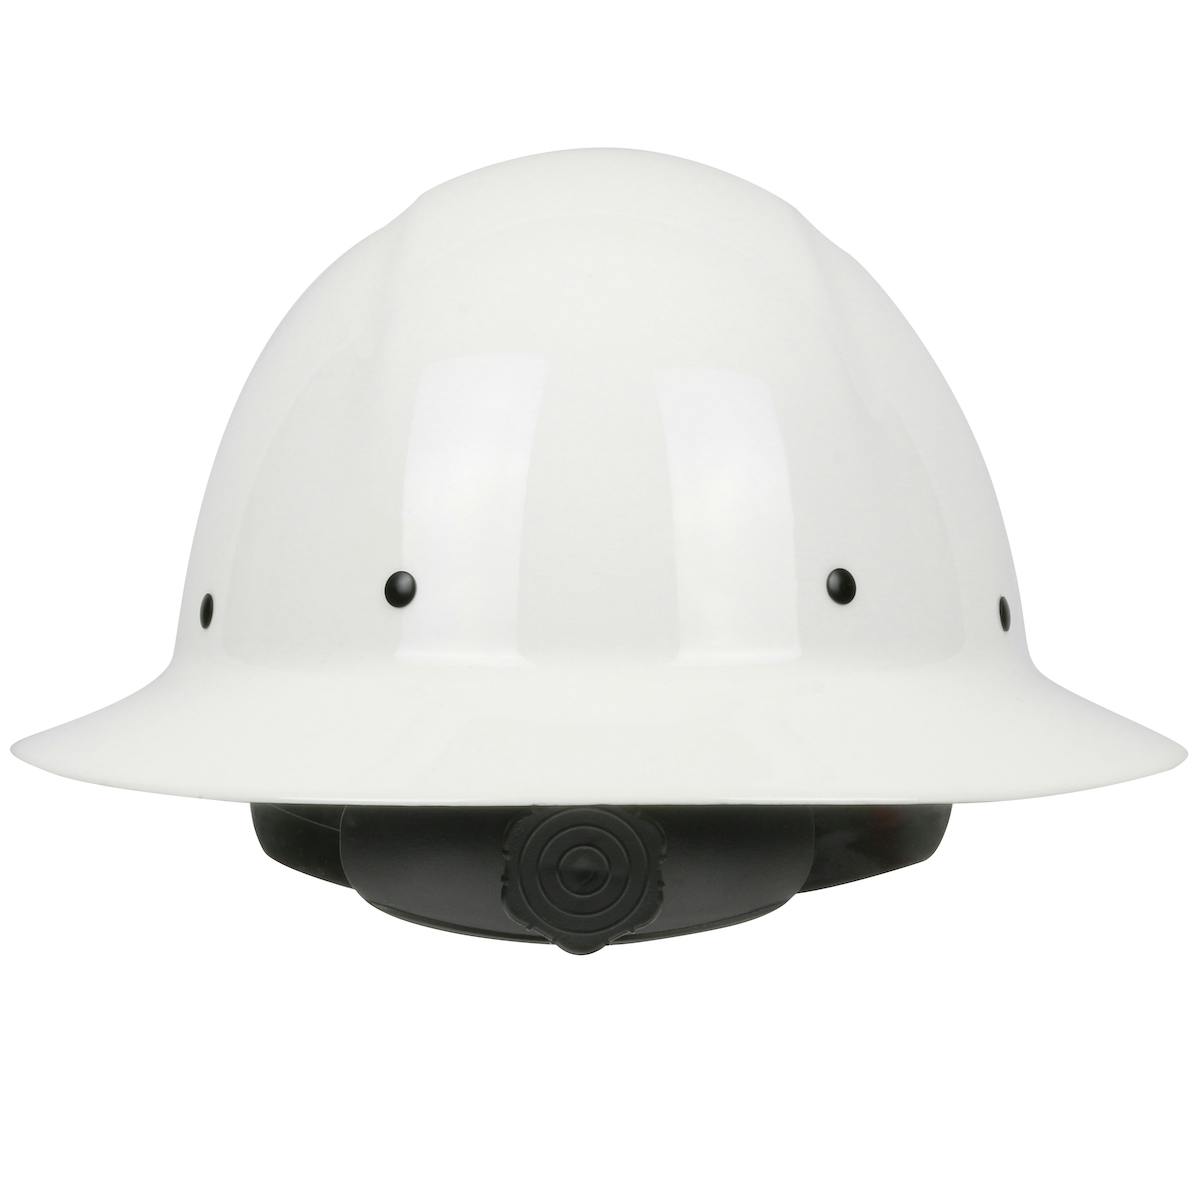 Wolfjaw™ Full Brim Smooth Dome Hard Hat with Fiberglass Resin Shell, 8-Point Riveted Textile Suspension and Wheel-Ratchet Adjustment (280-HP1481R)